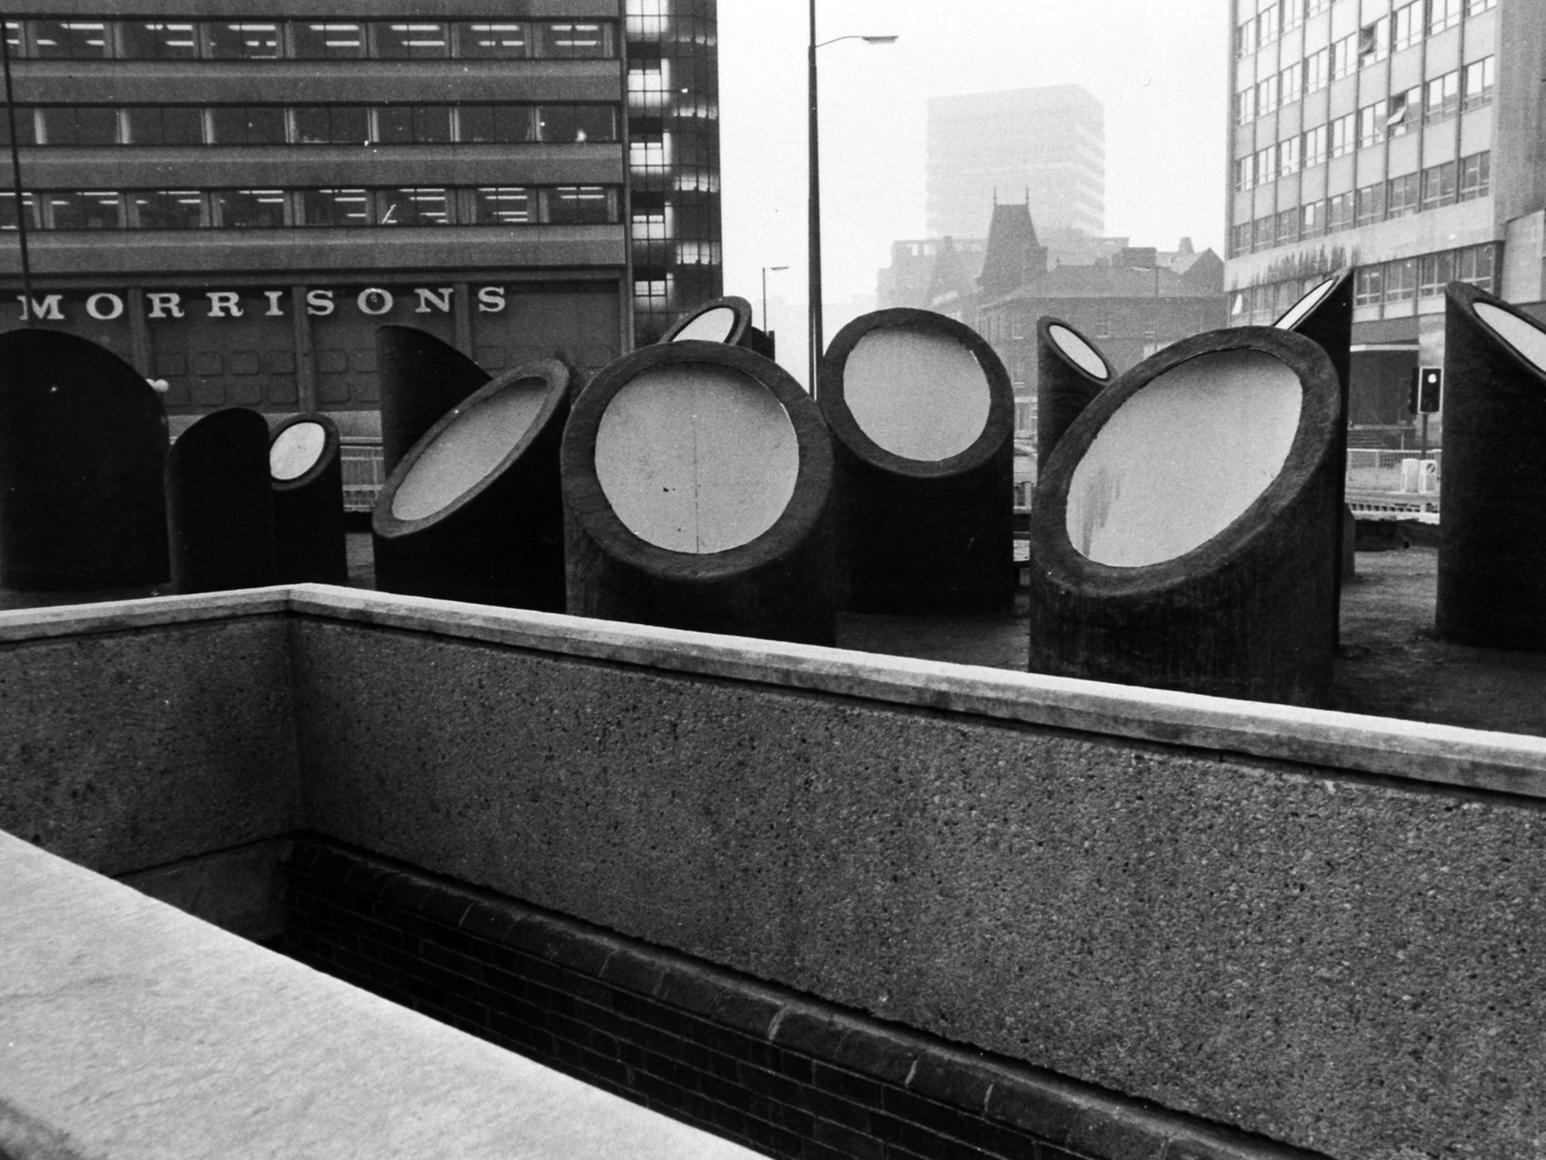 Does anyone know what these were used for in Woodhouse Lane? They were the subject of a complaint from a YEP reader back in the mid-1970s.